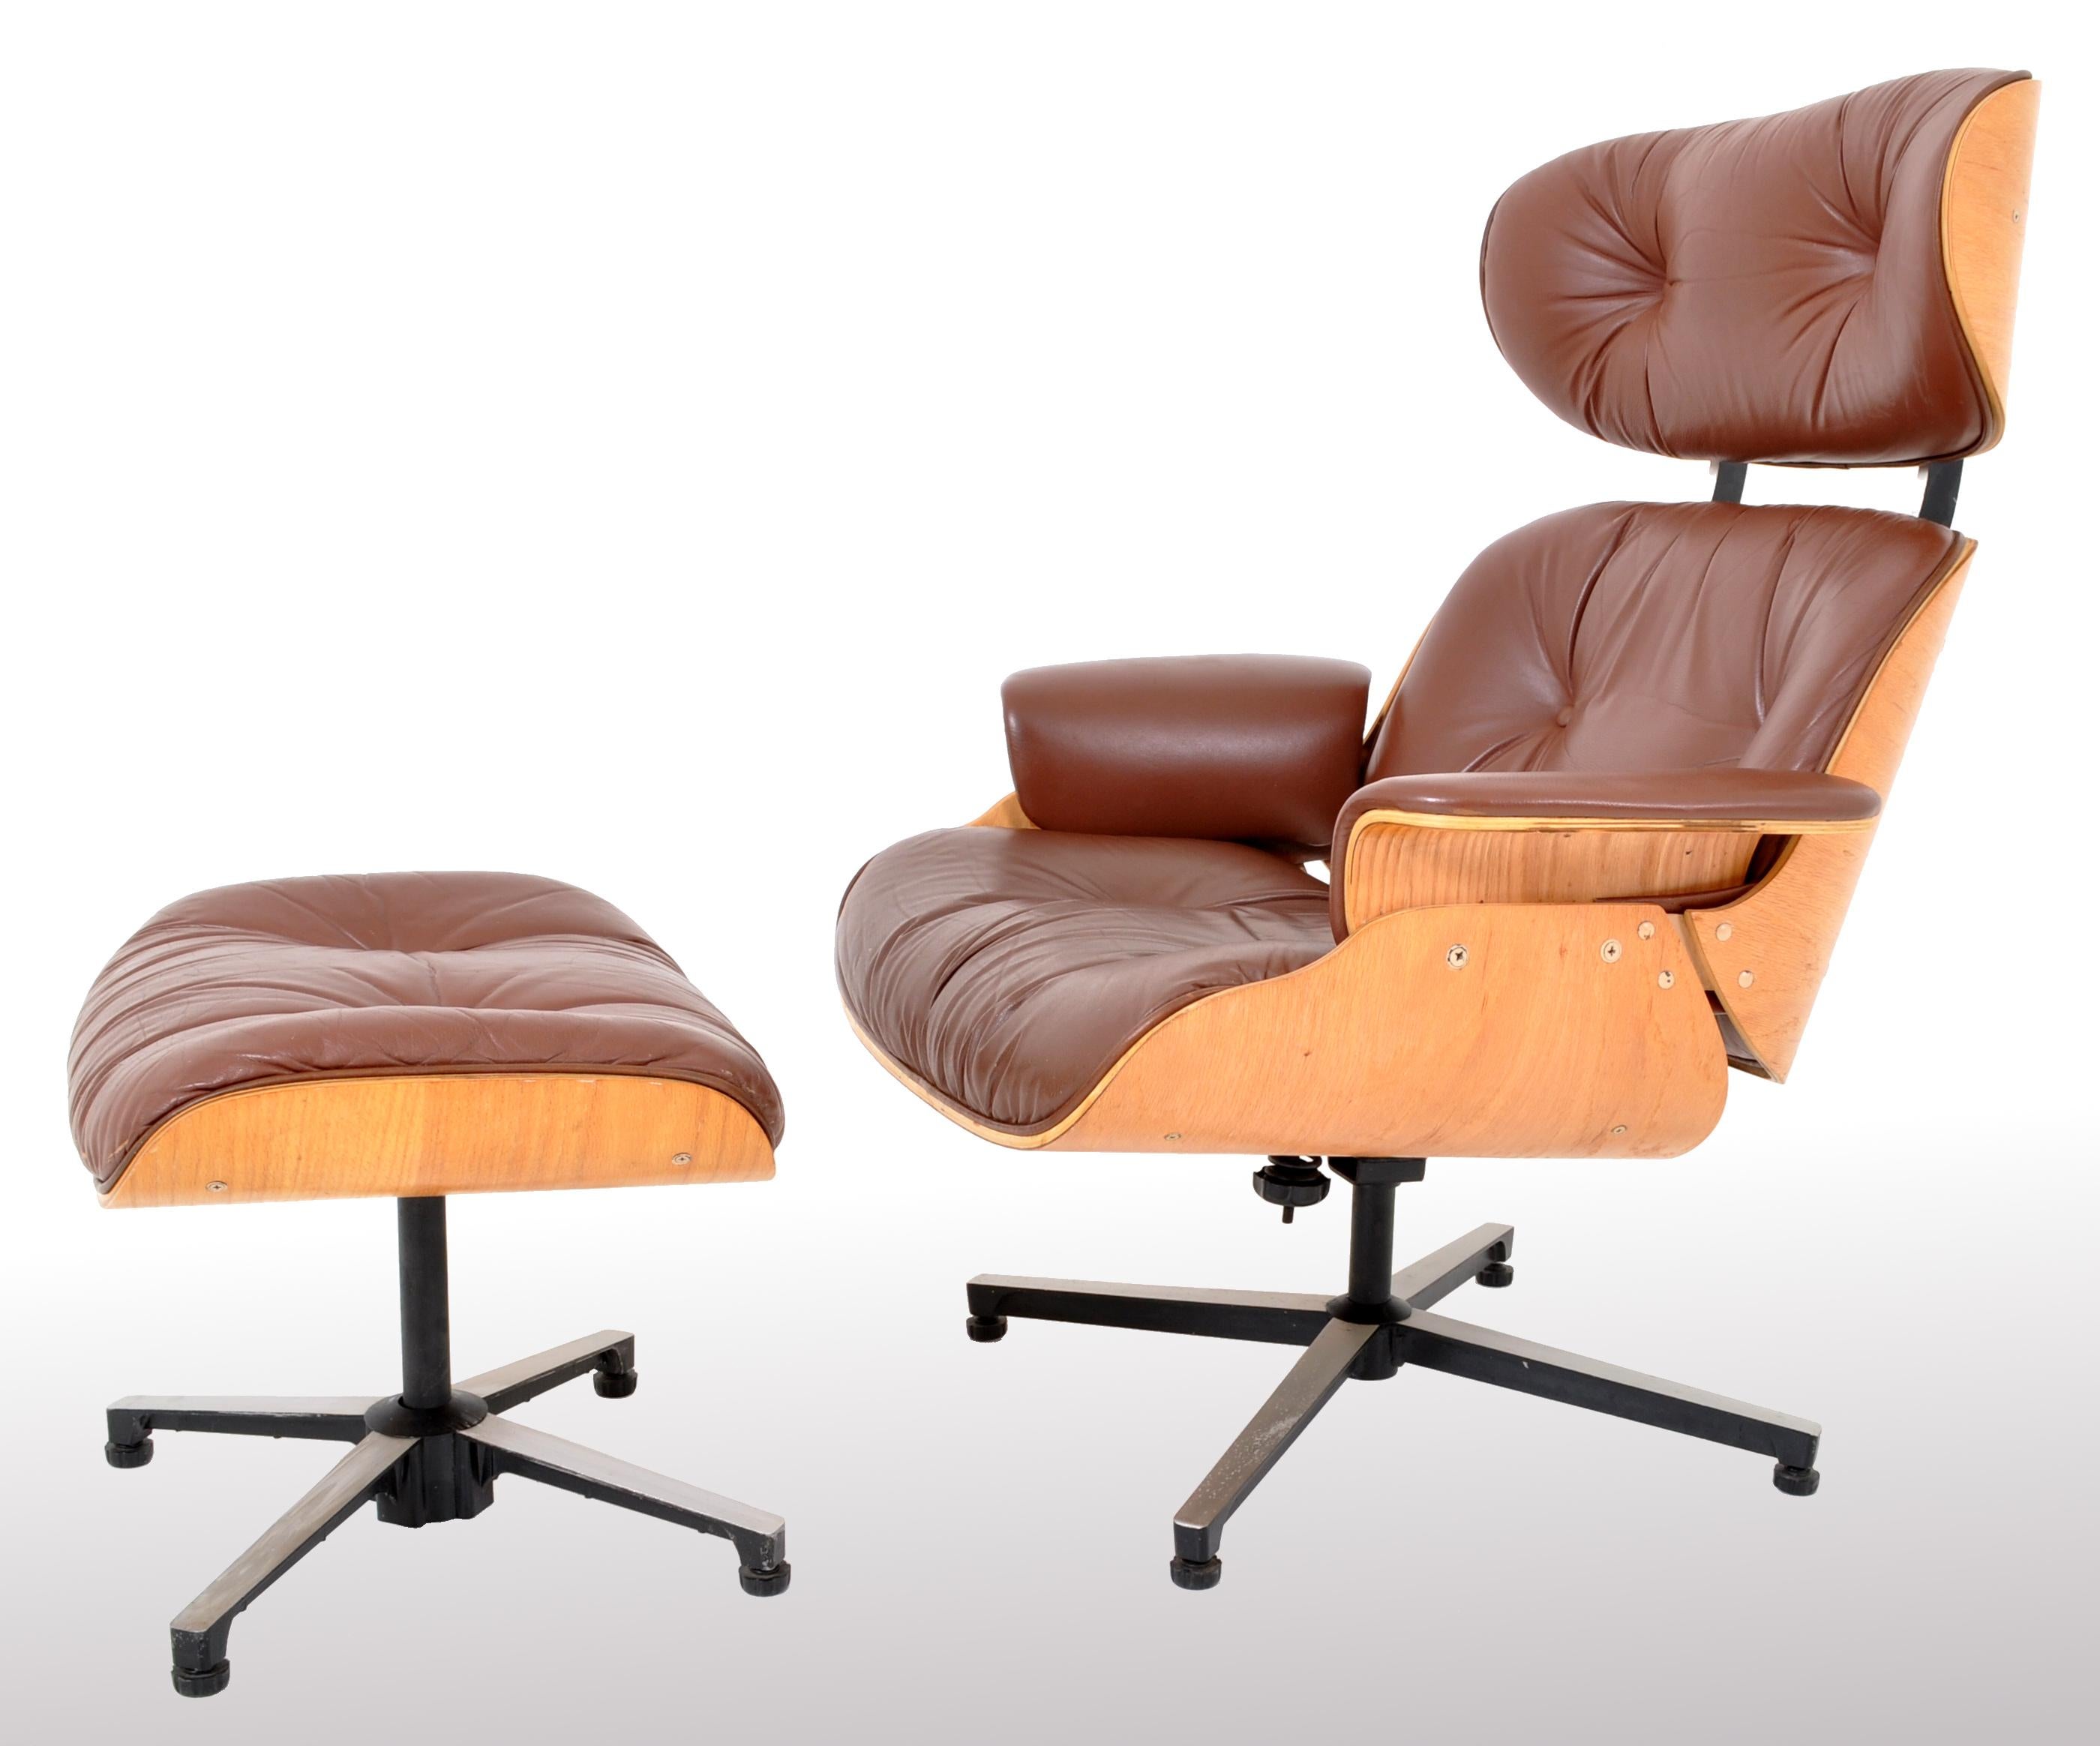 Mid-Century Modern vintage Plycraft Eames style 670-71 lounge chair and ottoman, from the 1960s. The chair and ottoman in a brown leather and blond shell.

Measures: Chair: 39